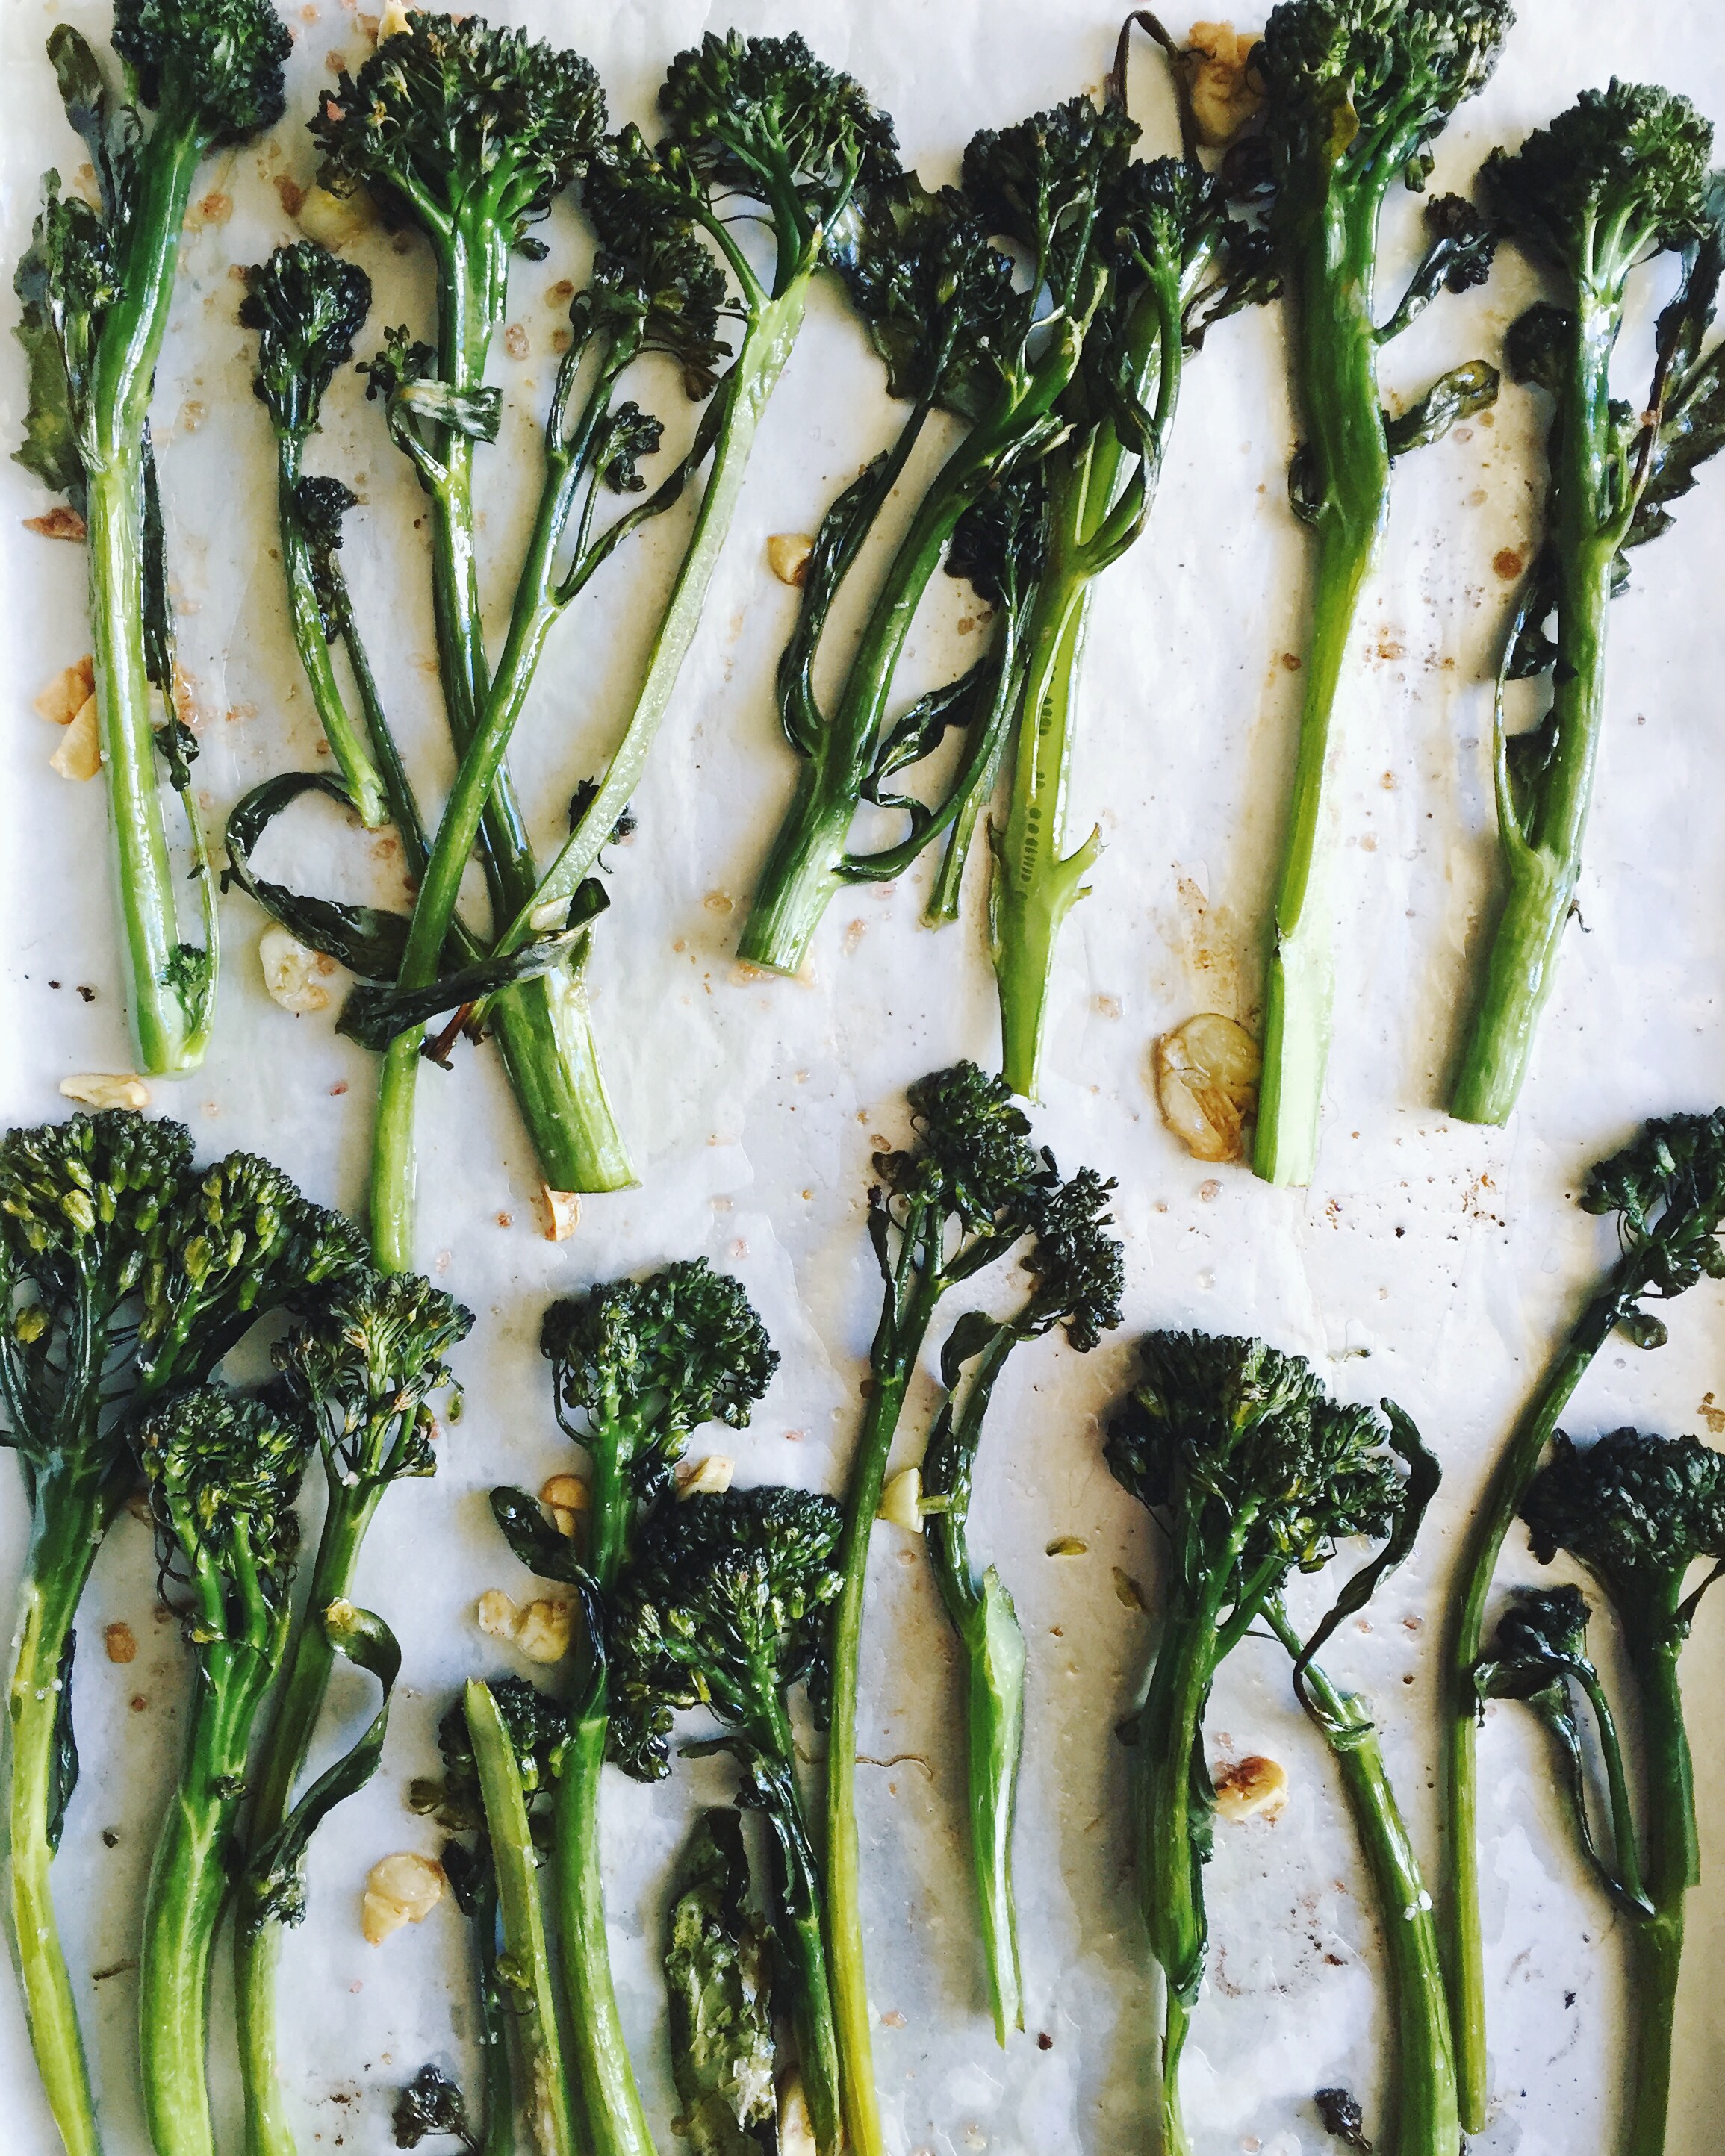 Garlic Roasted Broccolette Earthbound Farm Organic Since 1984,Thermofoil Cabinets Vs Wood